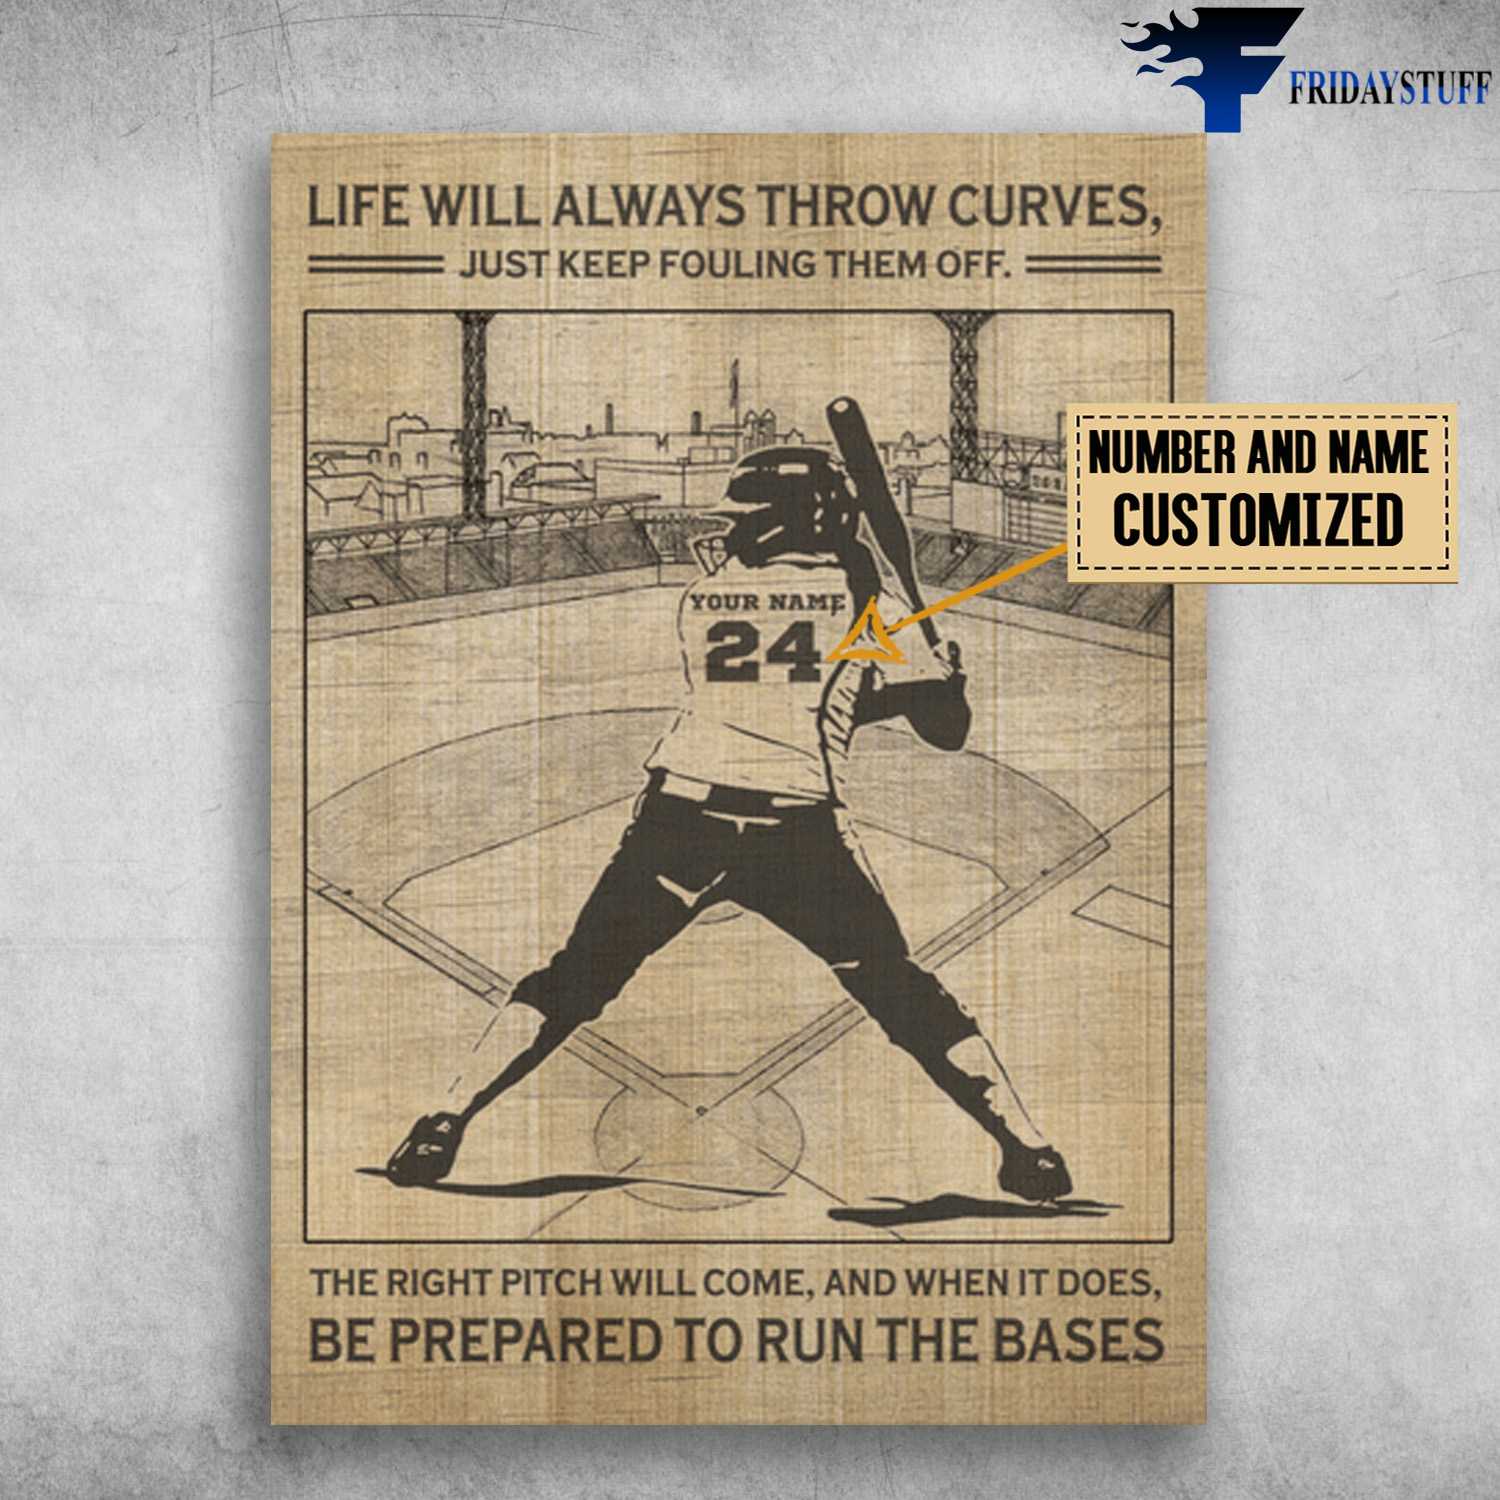 Baseball Player, Life Will Always Throw Curves, Jusy Keep Fouling Them Off, The Right Pitch Will Come, And When It Does, Be Prerared To Run The Bases, Baseball Lover